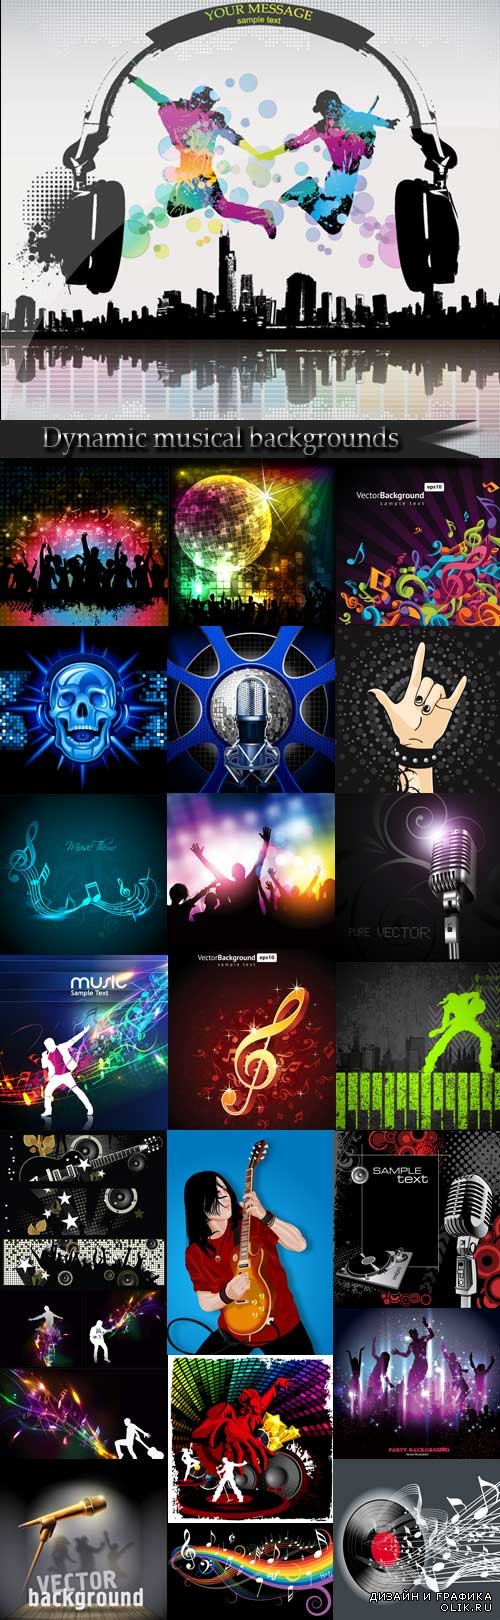 Dynamic musical backgrounds vector